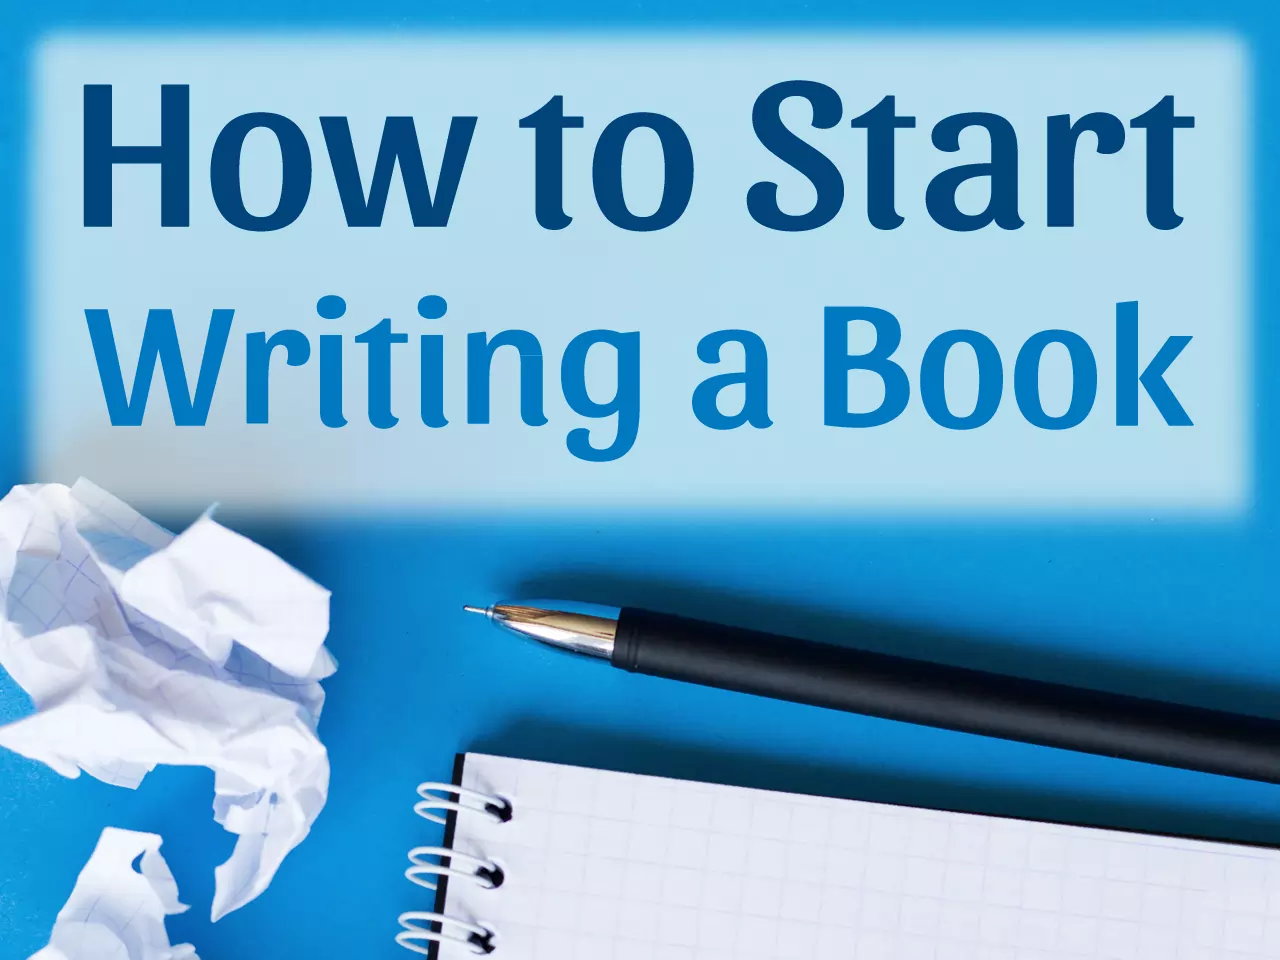 How to Start Writing a Book